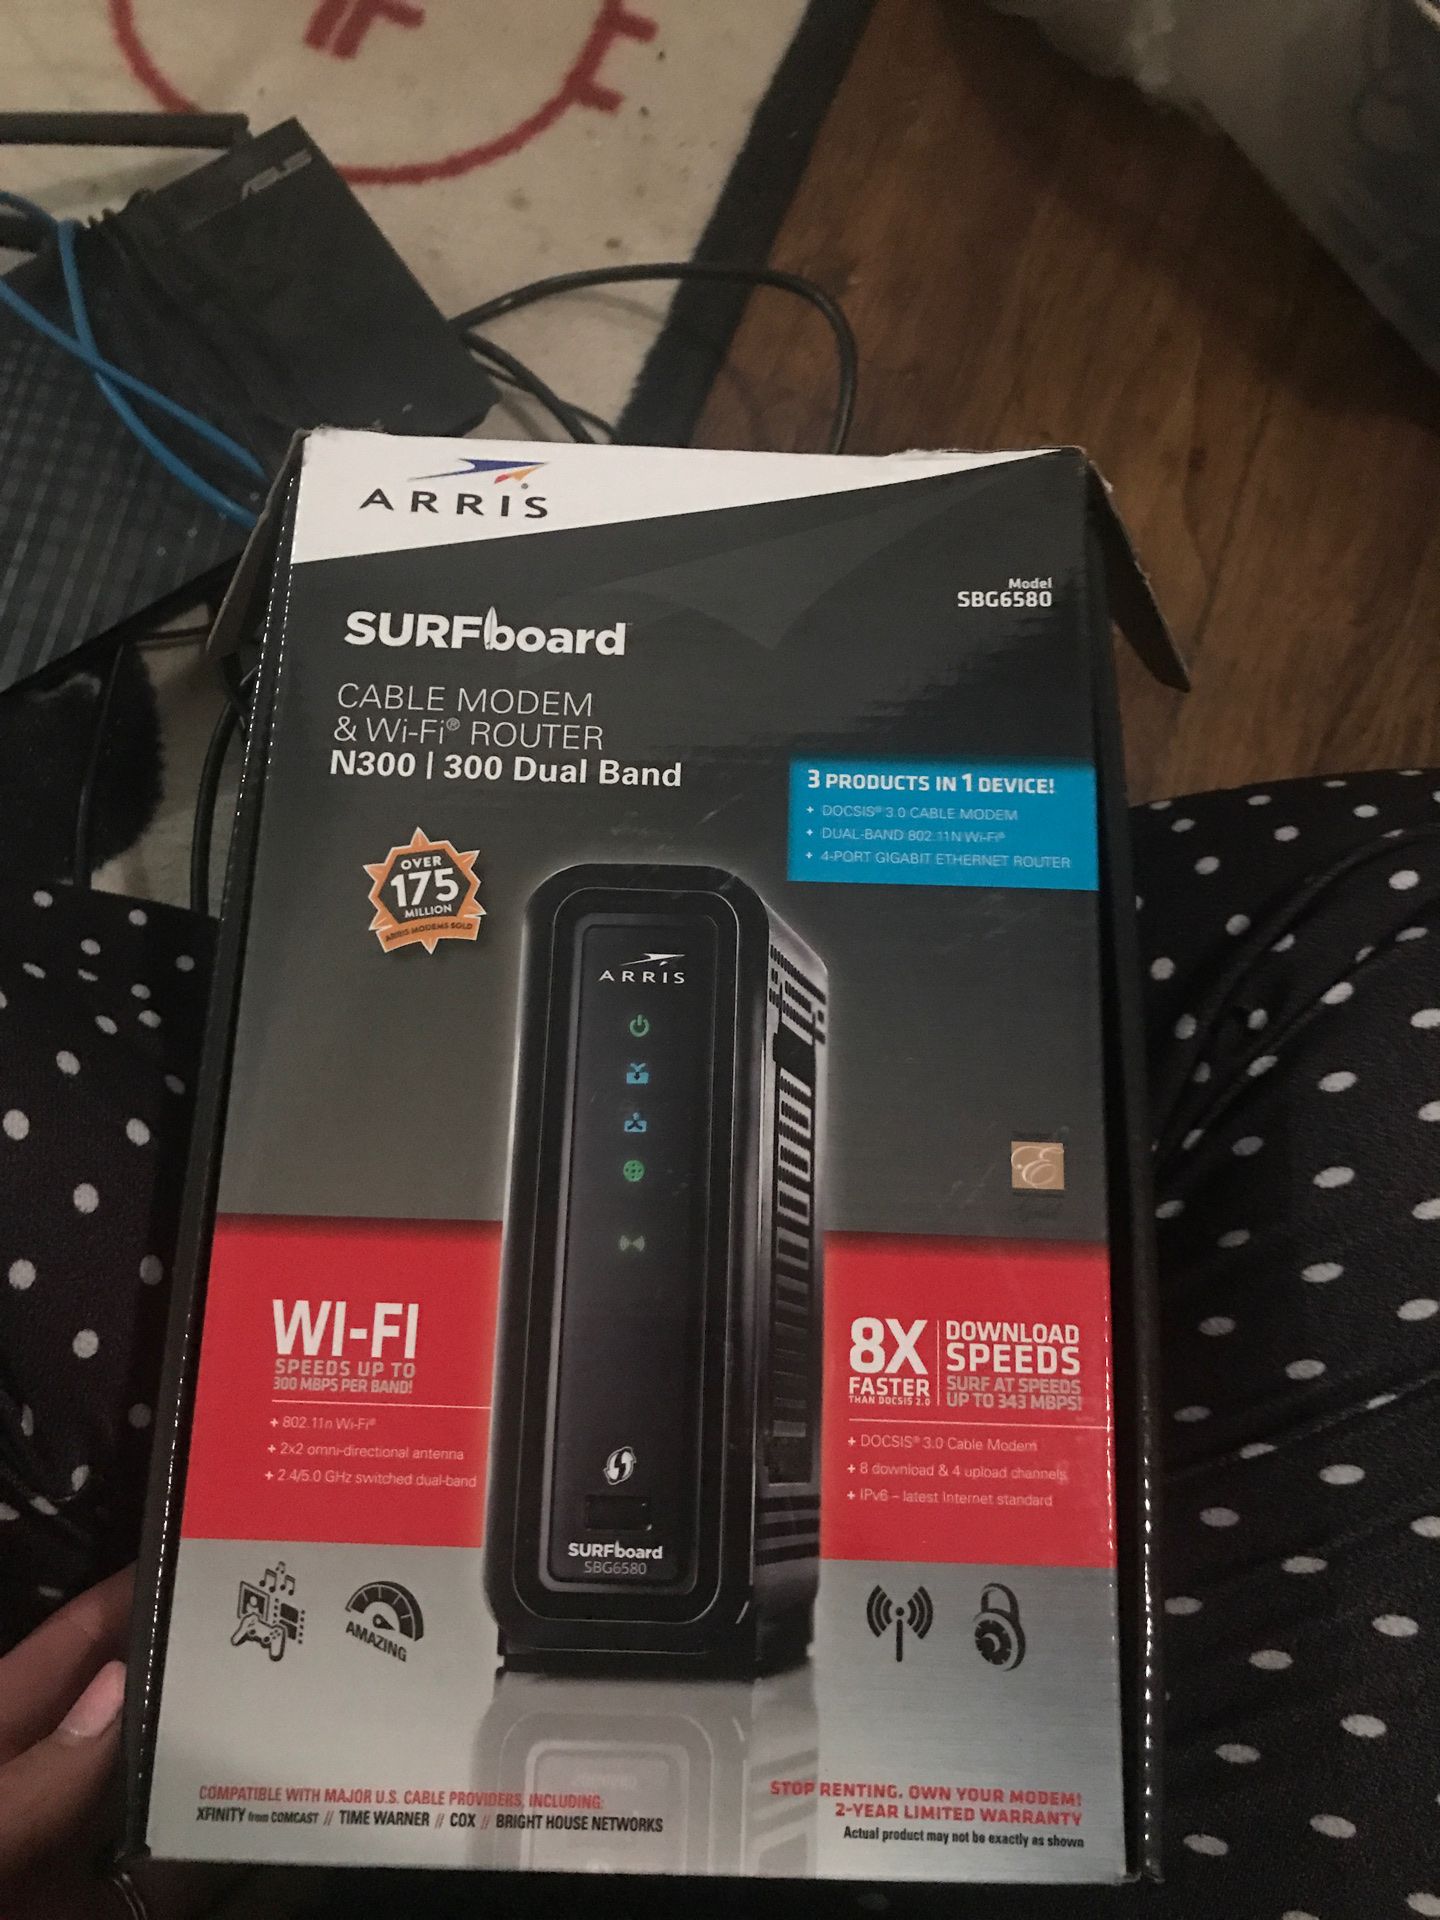 Cable modem and WiFi router